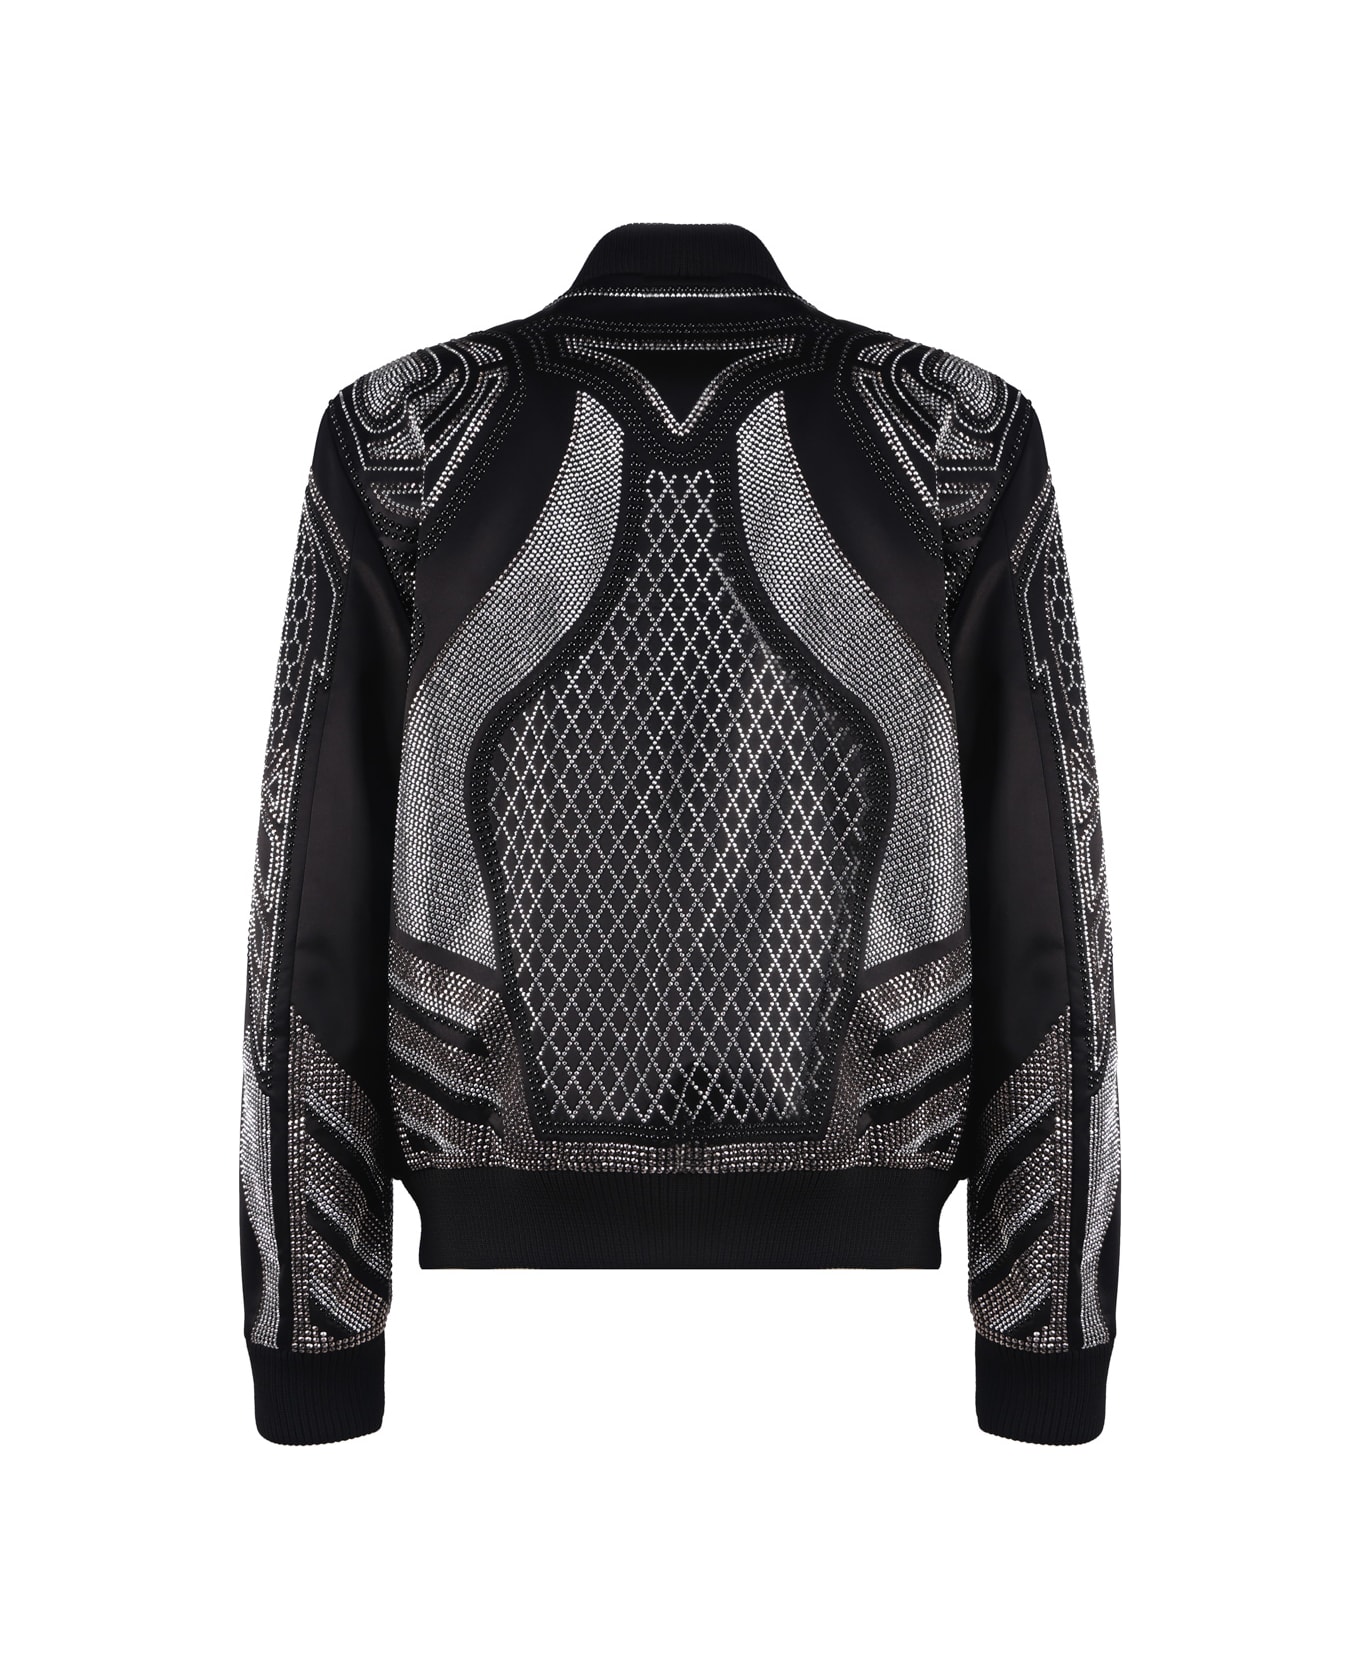 Balmain All-over Embroidered Jacket With Studs - Black